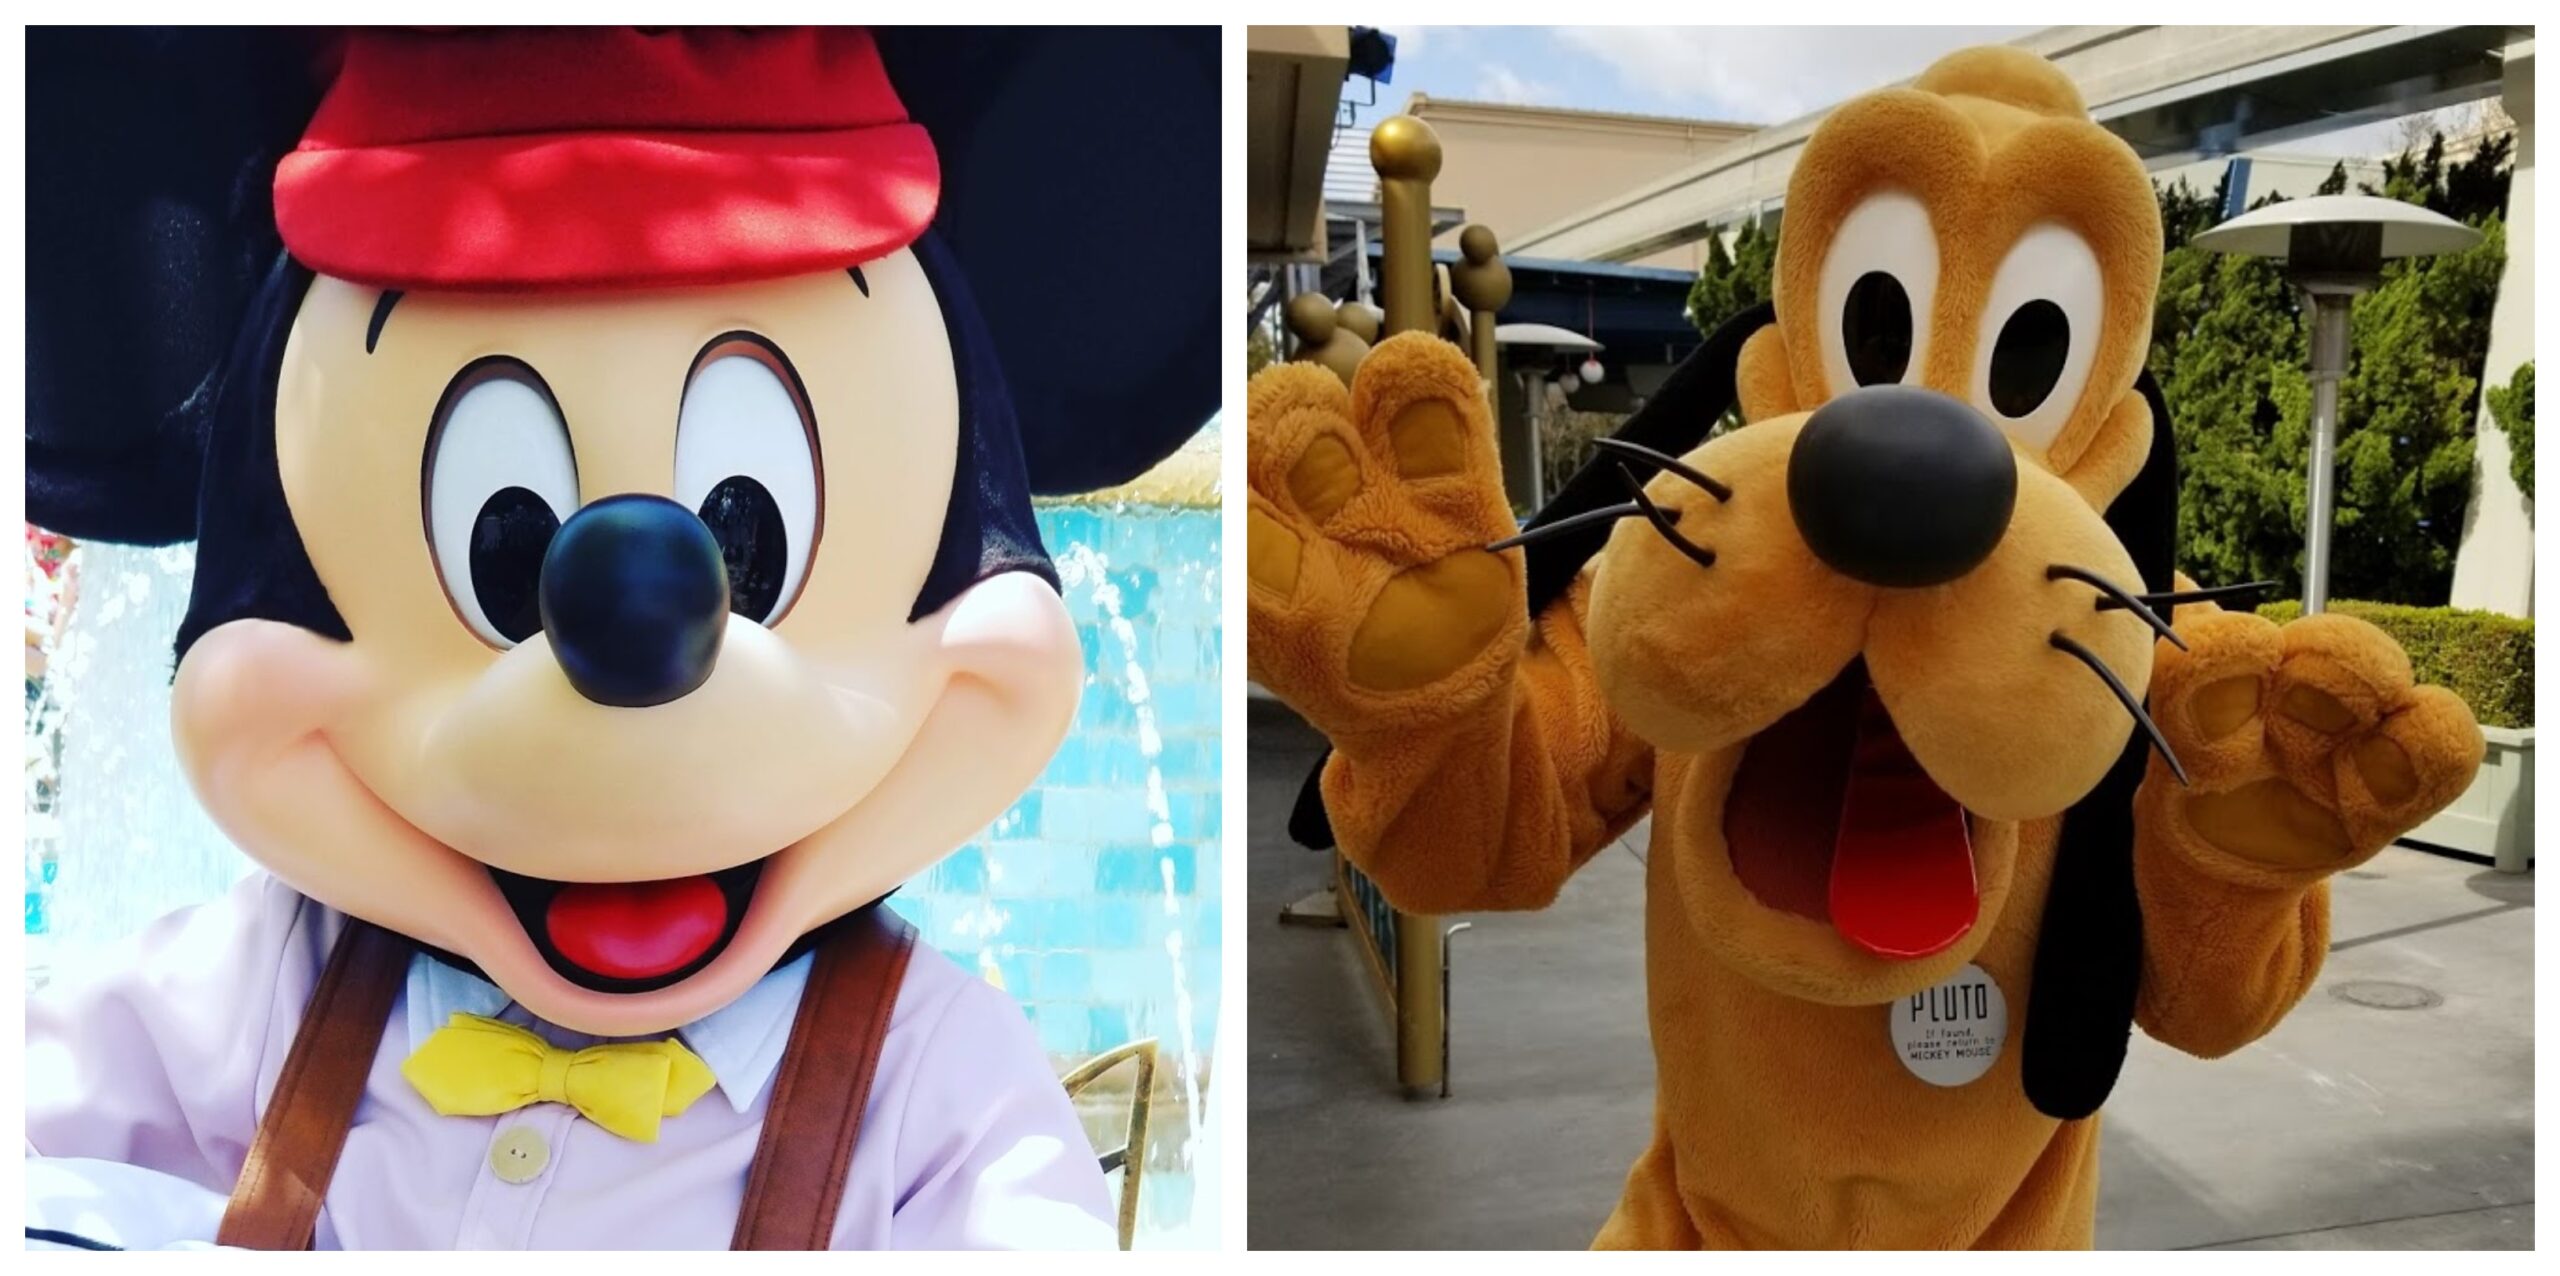 Characters are part of the magic for the reopening of Disneyland